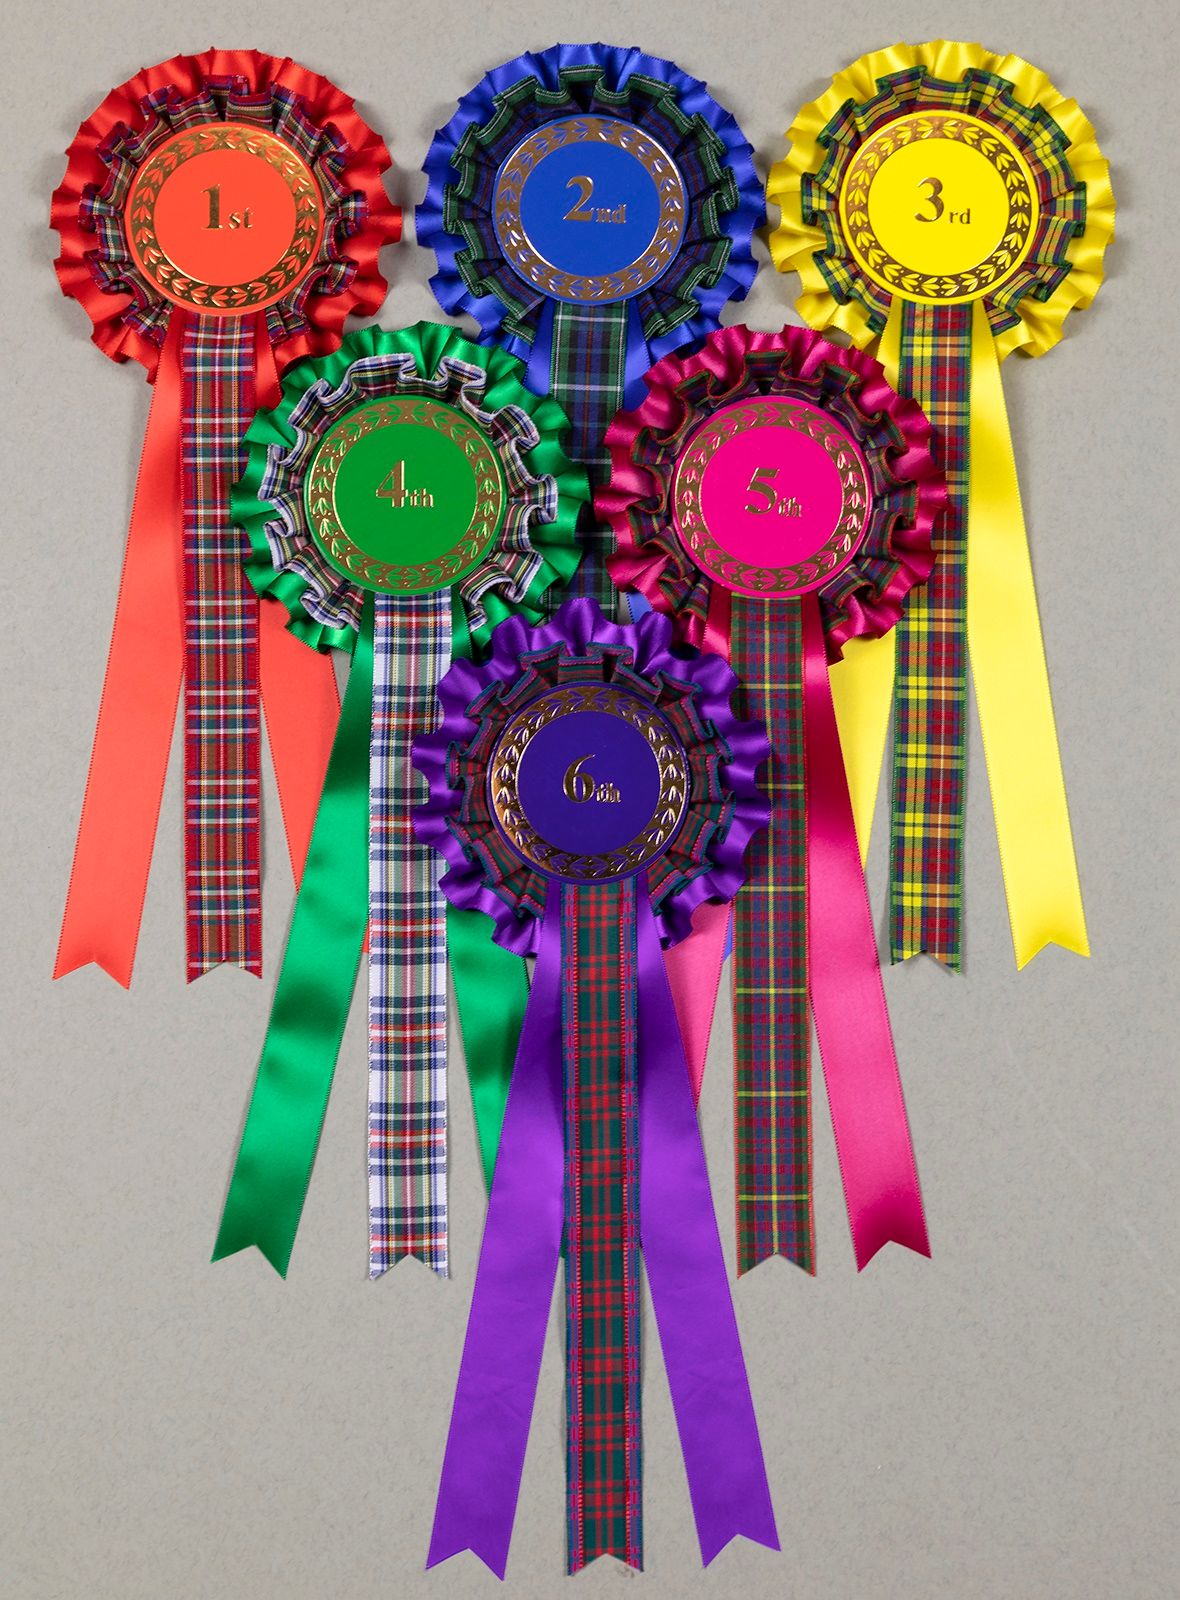 1st-6th 2 tier rosettes Large 68mm Centres  *FREE POSTAGE* 